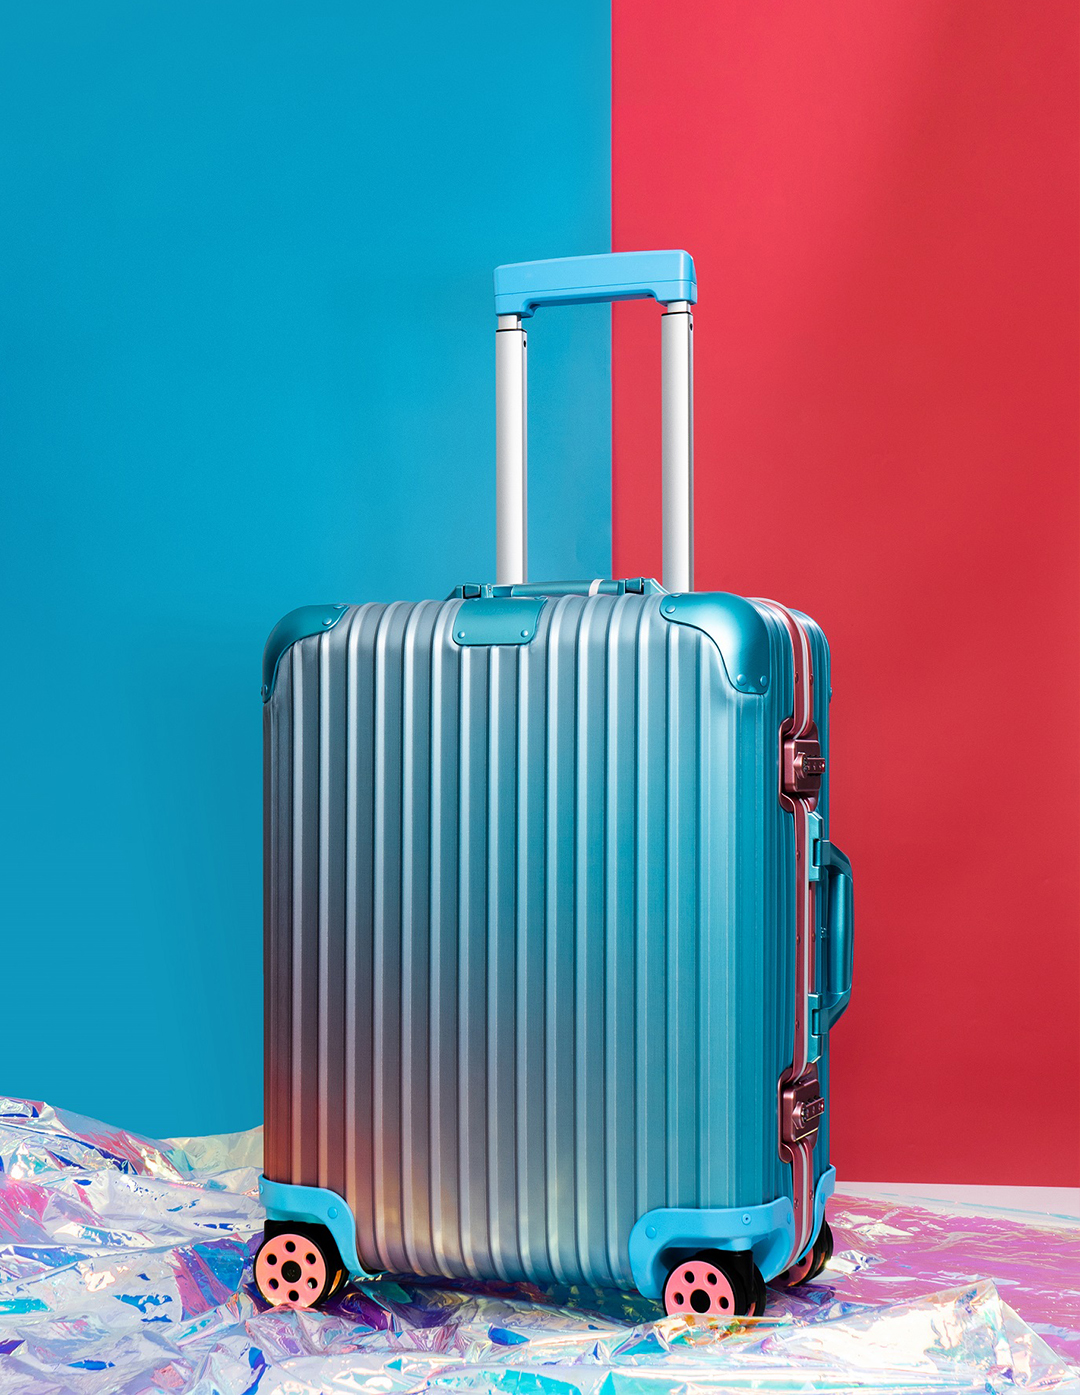 Have Art, Will Travel? Alex Israel Designed Custom Color-Graded Suitcases  With Luxury Luggage Brand RIMOWA